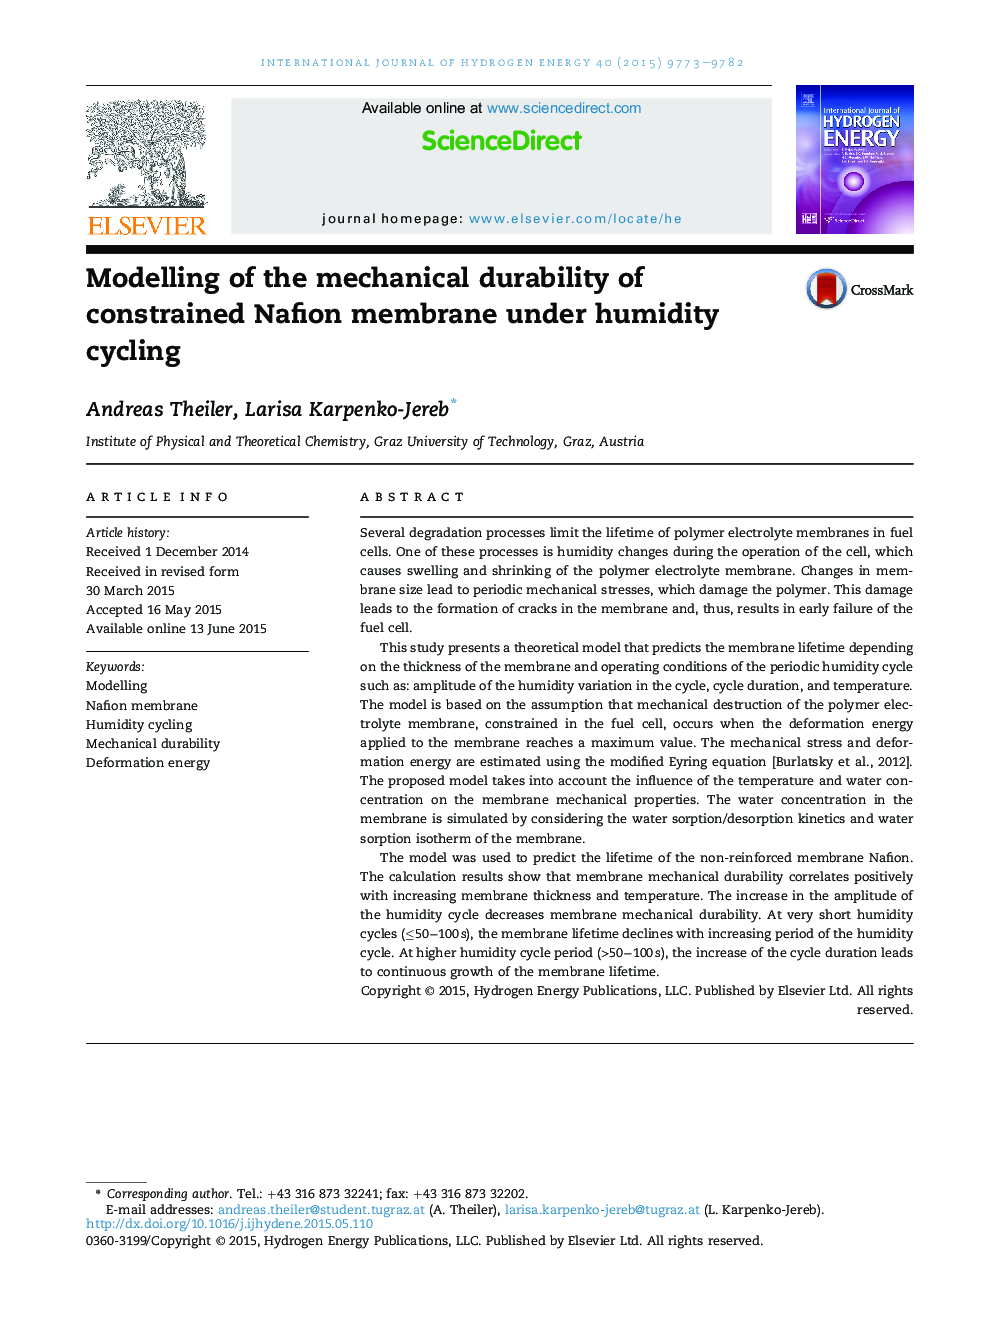 Modelling of the mechanical durability of constrained Nafion membrane under humidity cycling